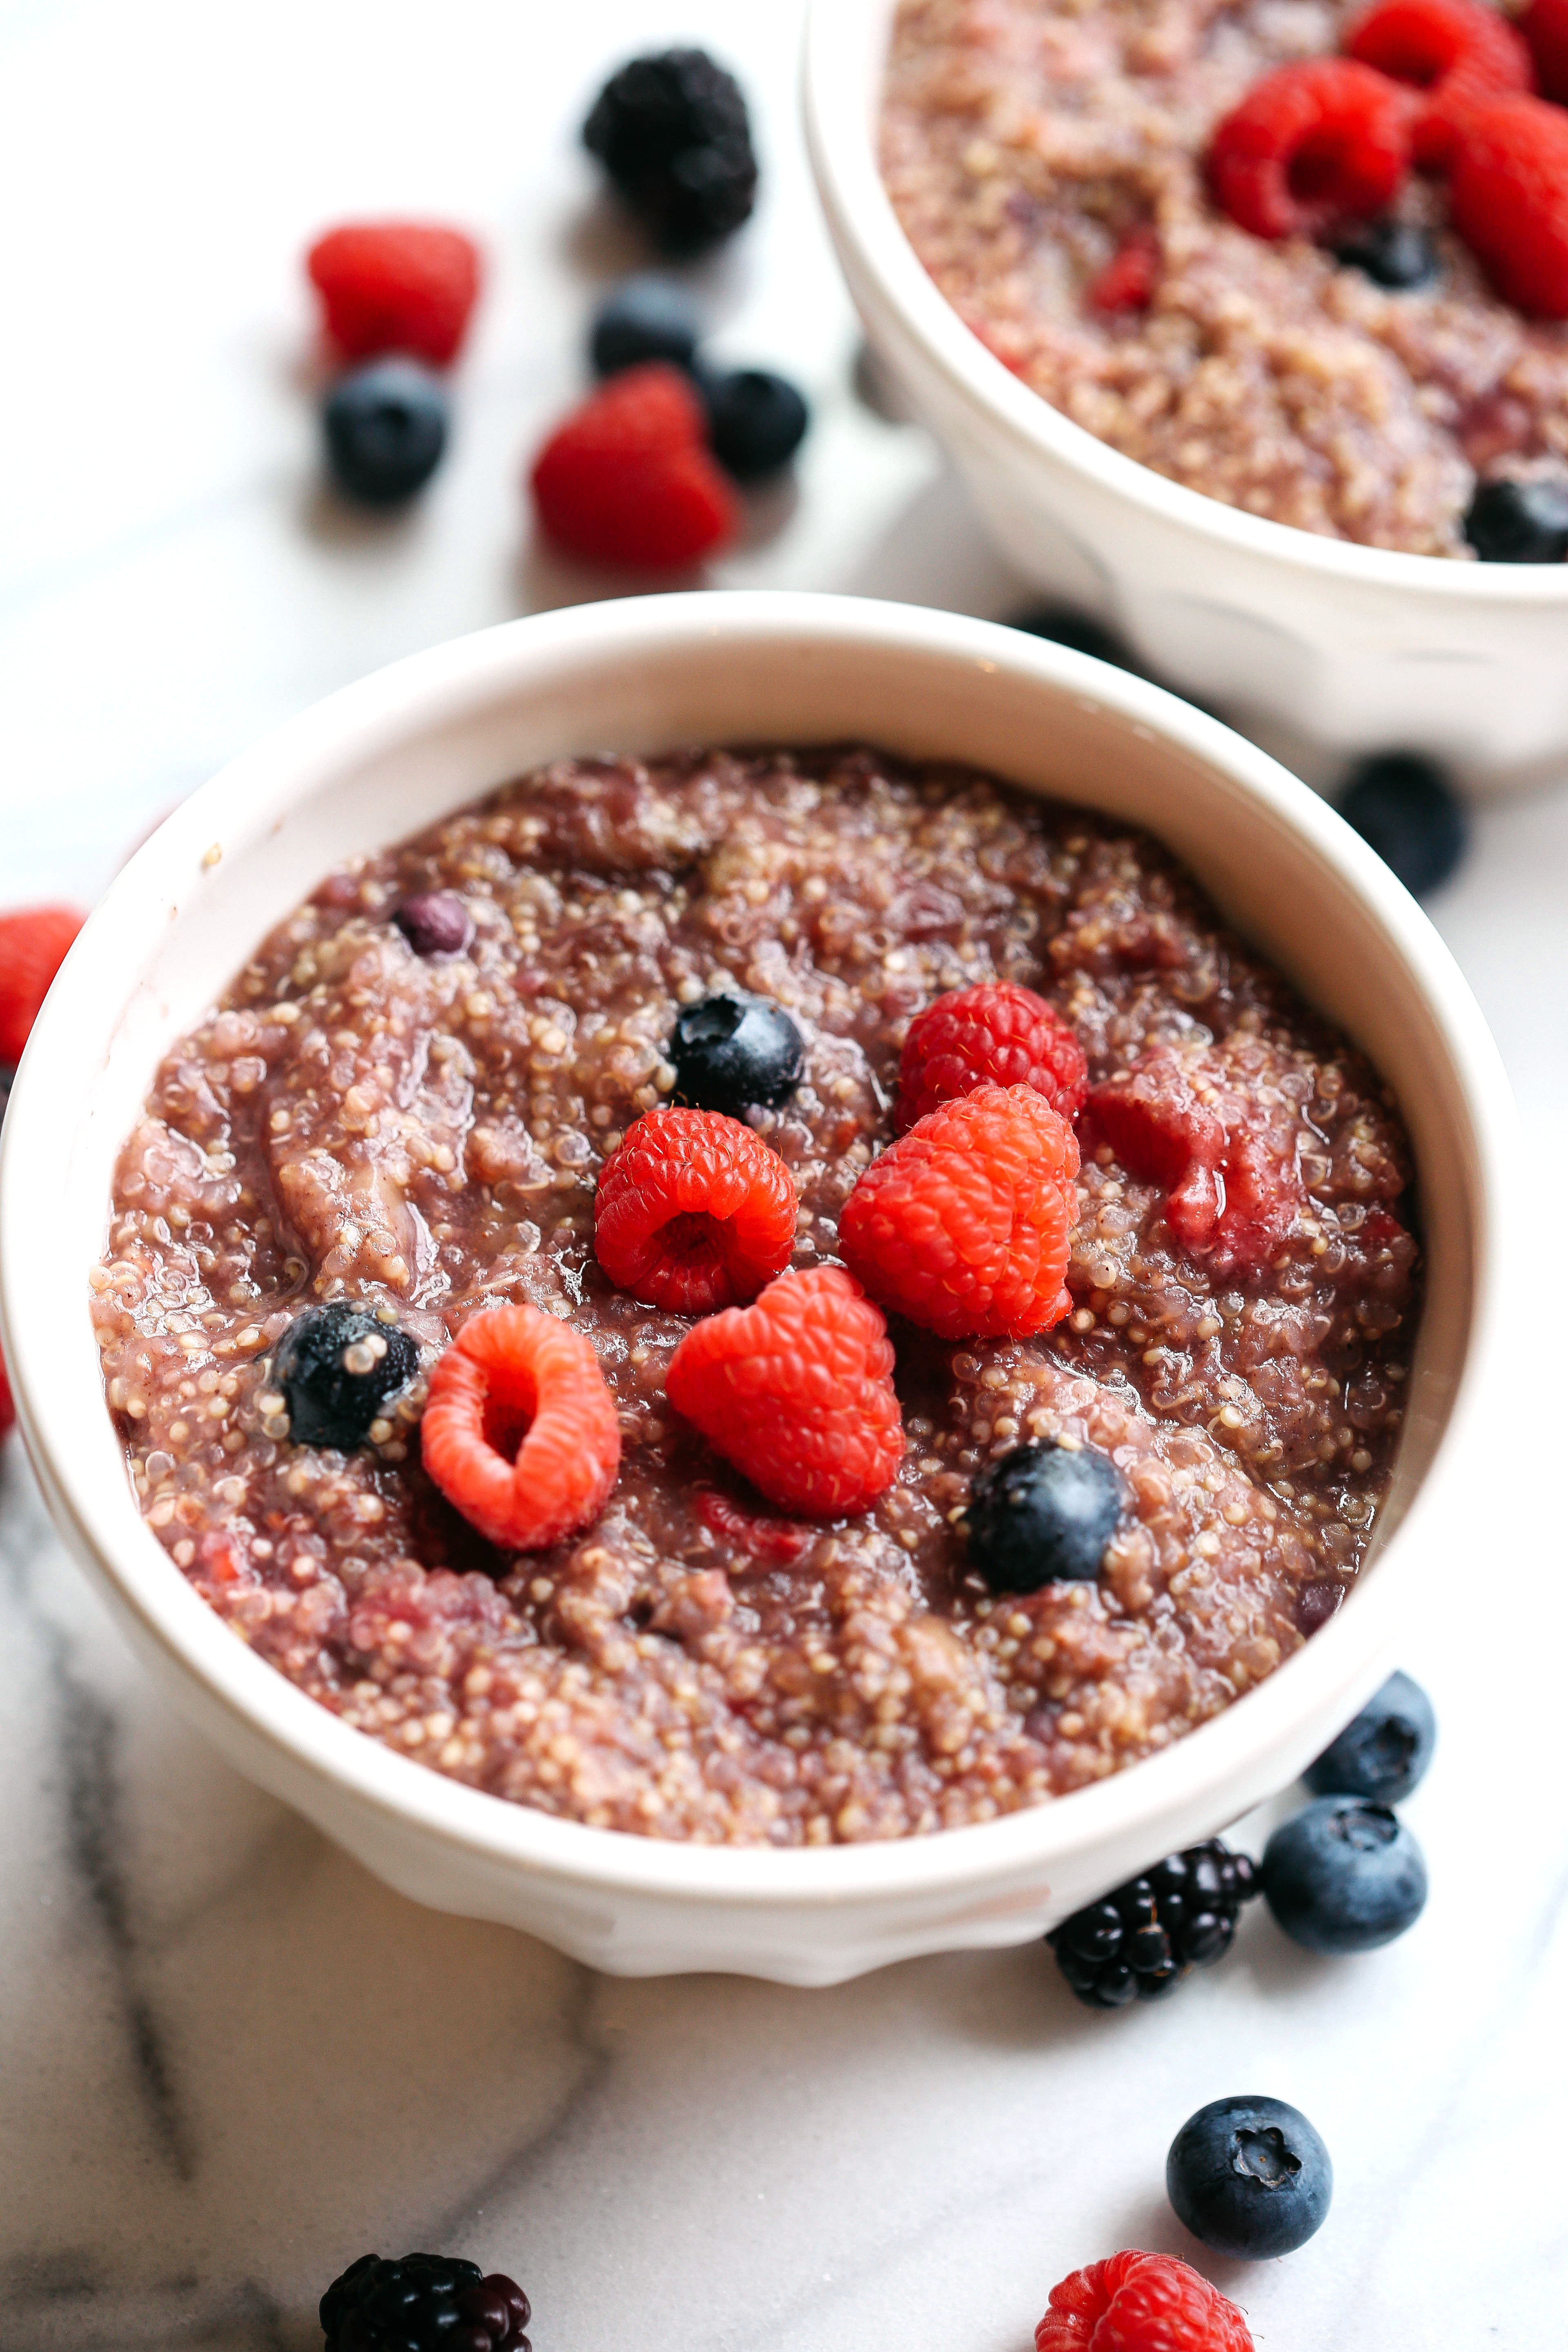 This protein-packed Slow Cooker Berry Breakfast Quinoa is the perfect way to start your mornings and can easily be made by throwing just a few simple ingredients into your crock pot!